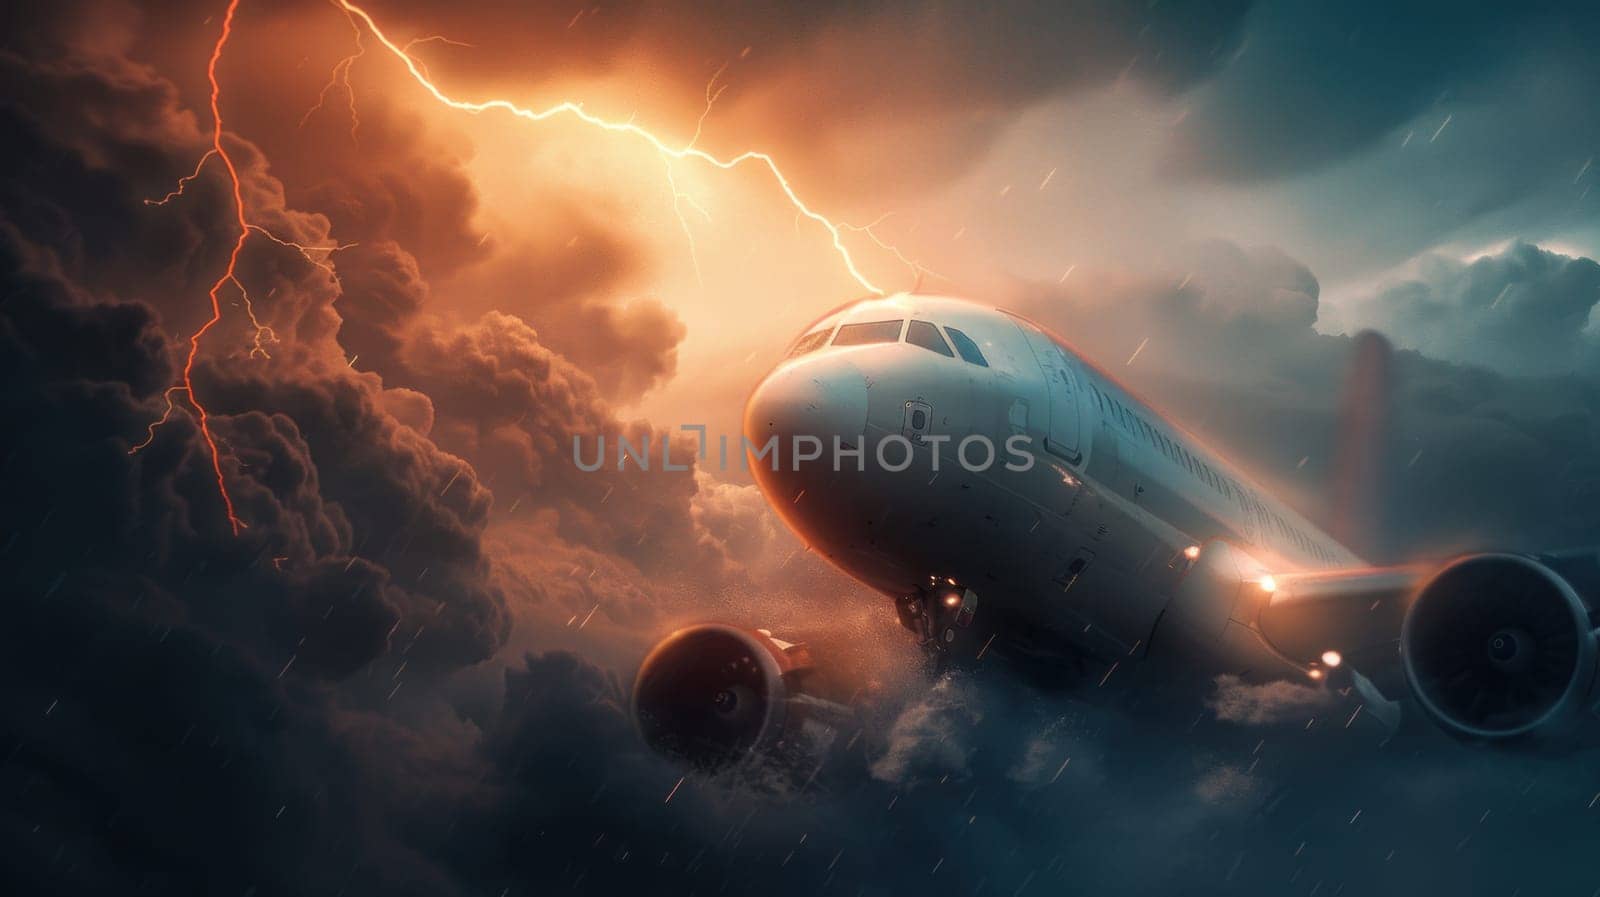 A plane is flying through a storm with a lightning bolt in the sky.